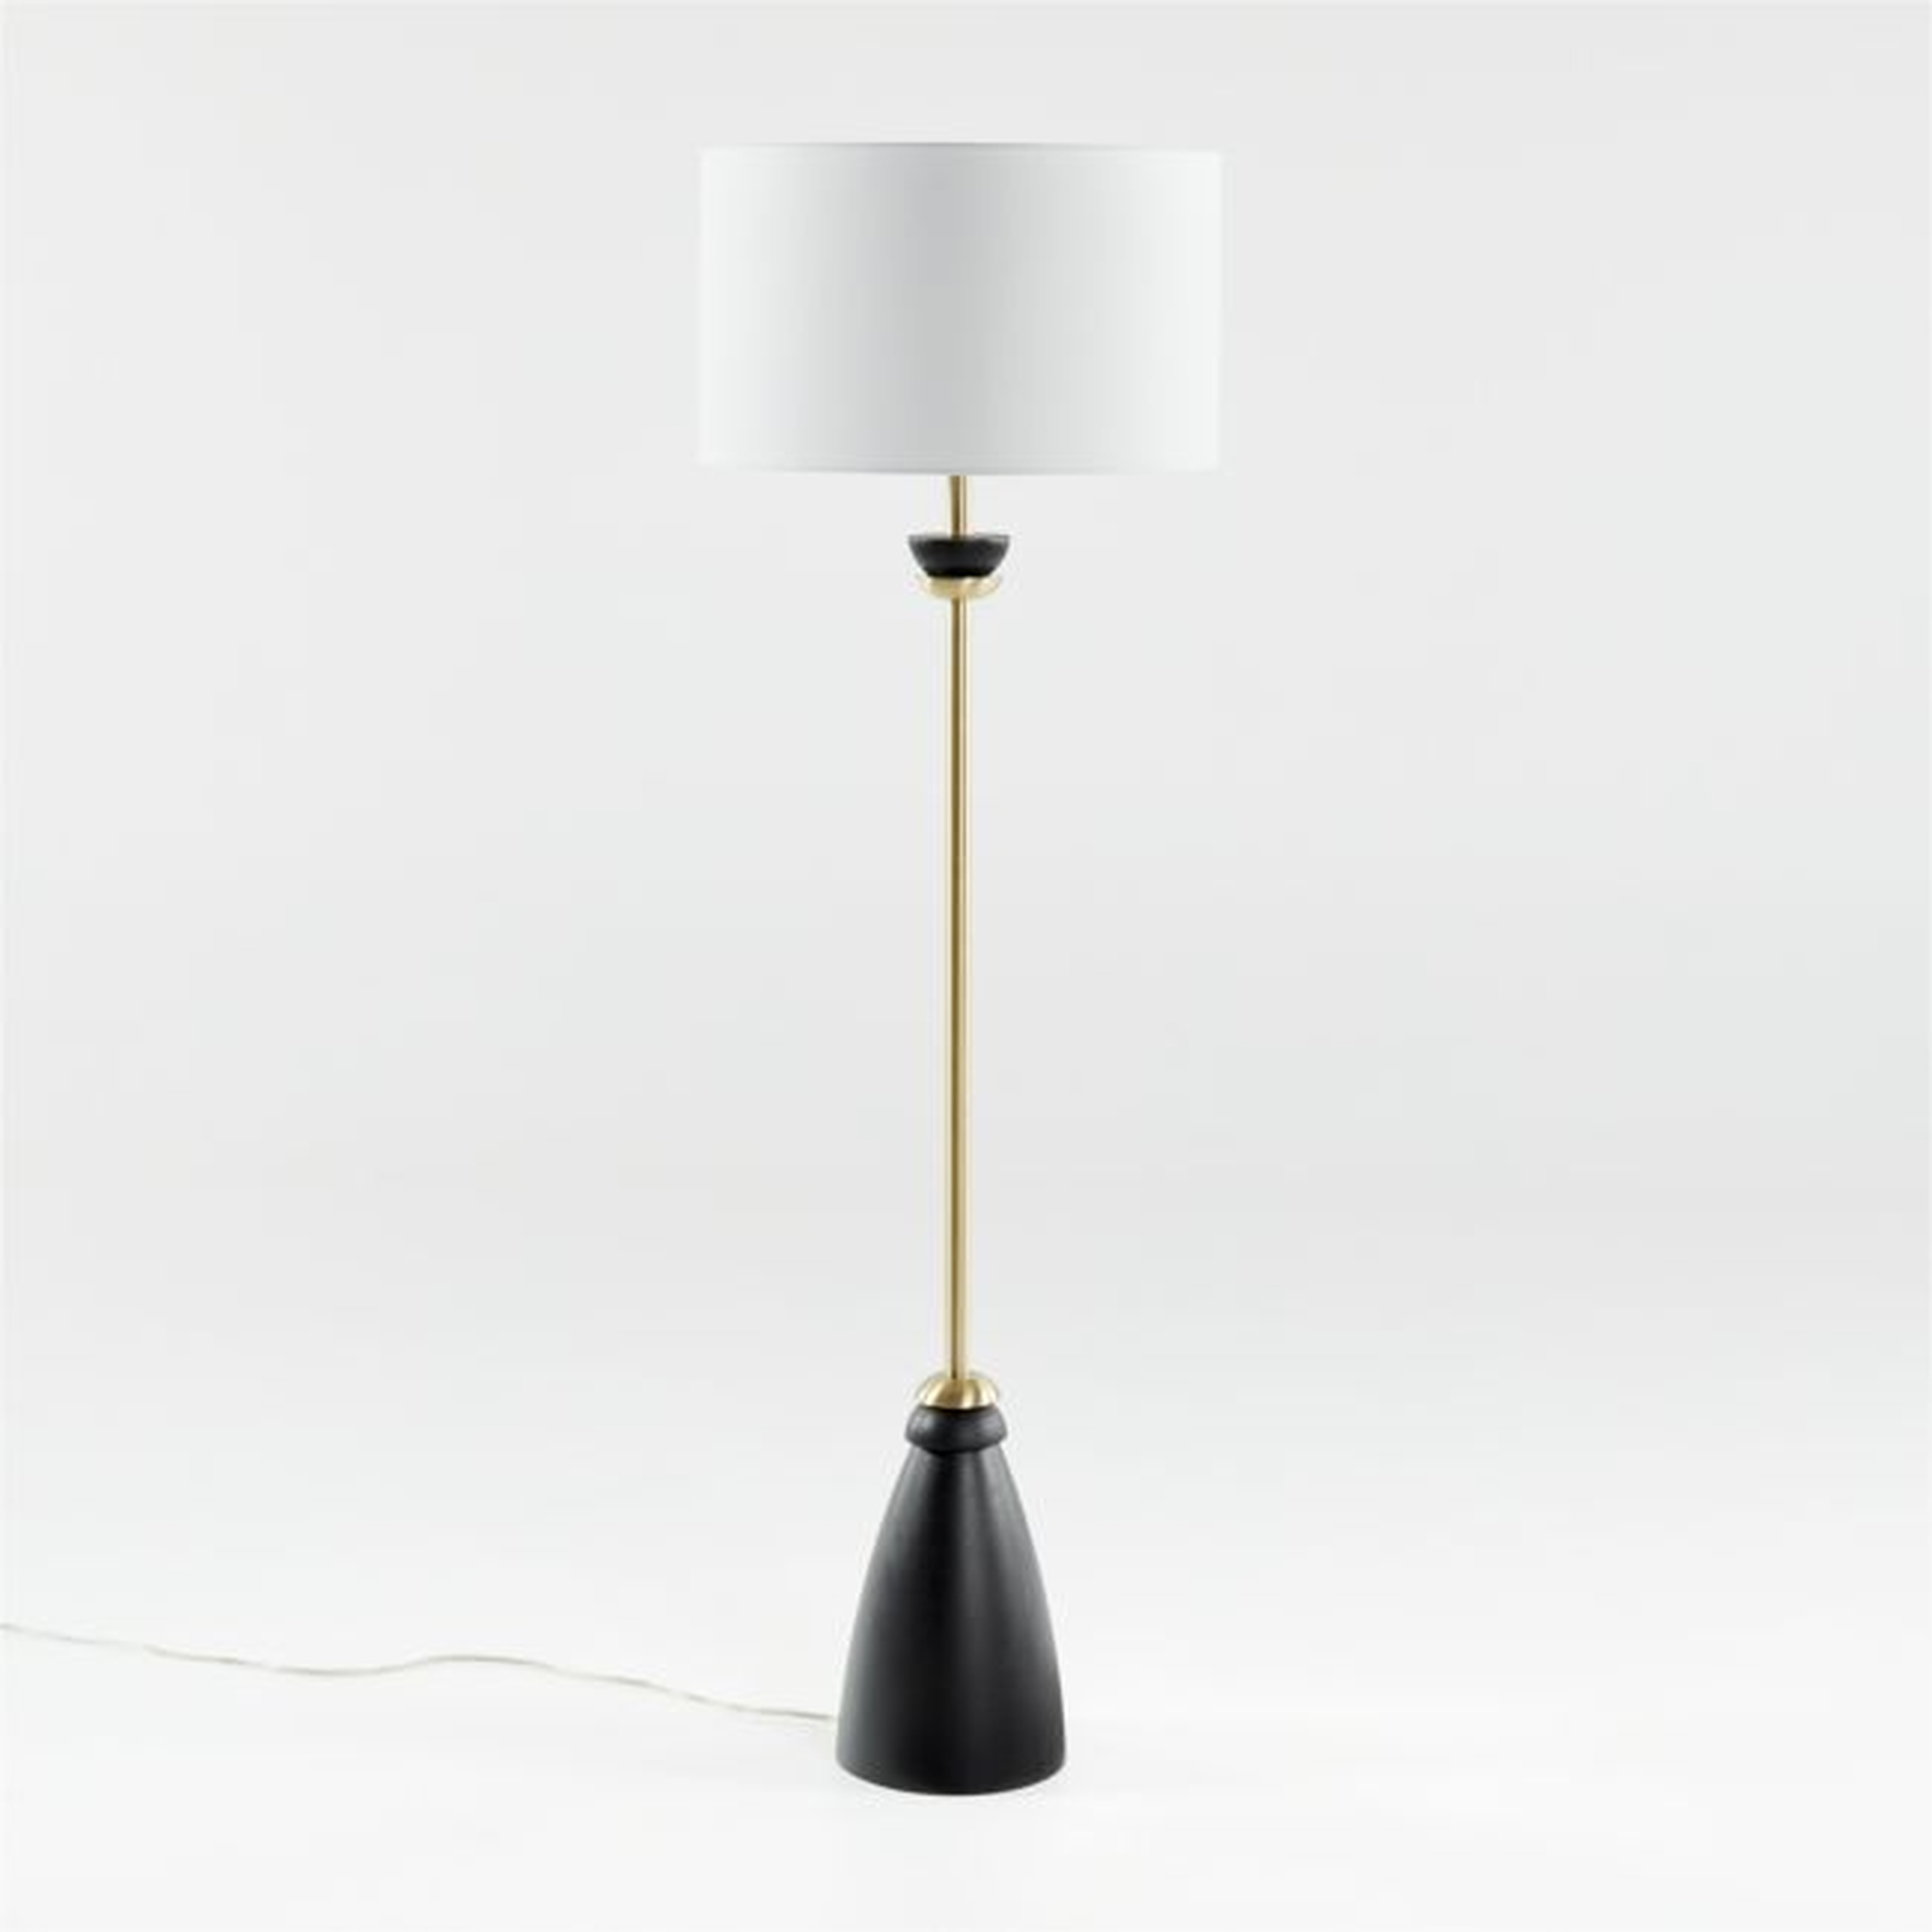 Olsted Floor Lamp - Crate and Barrel